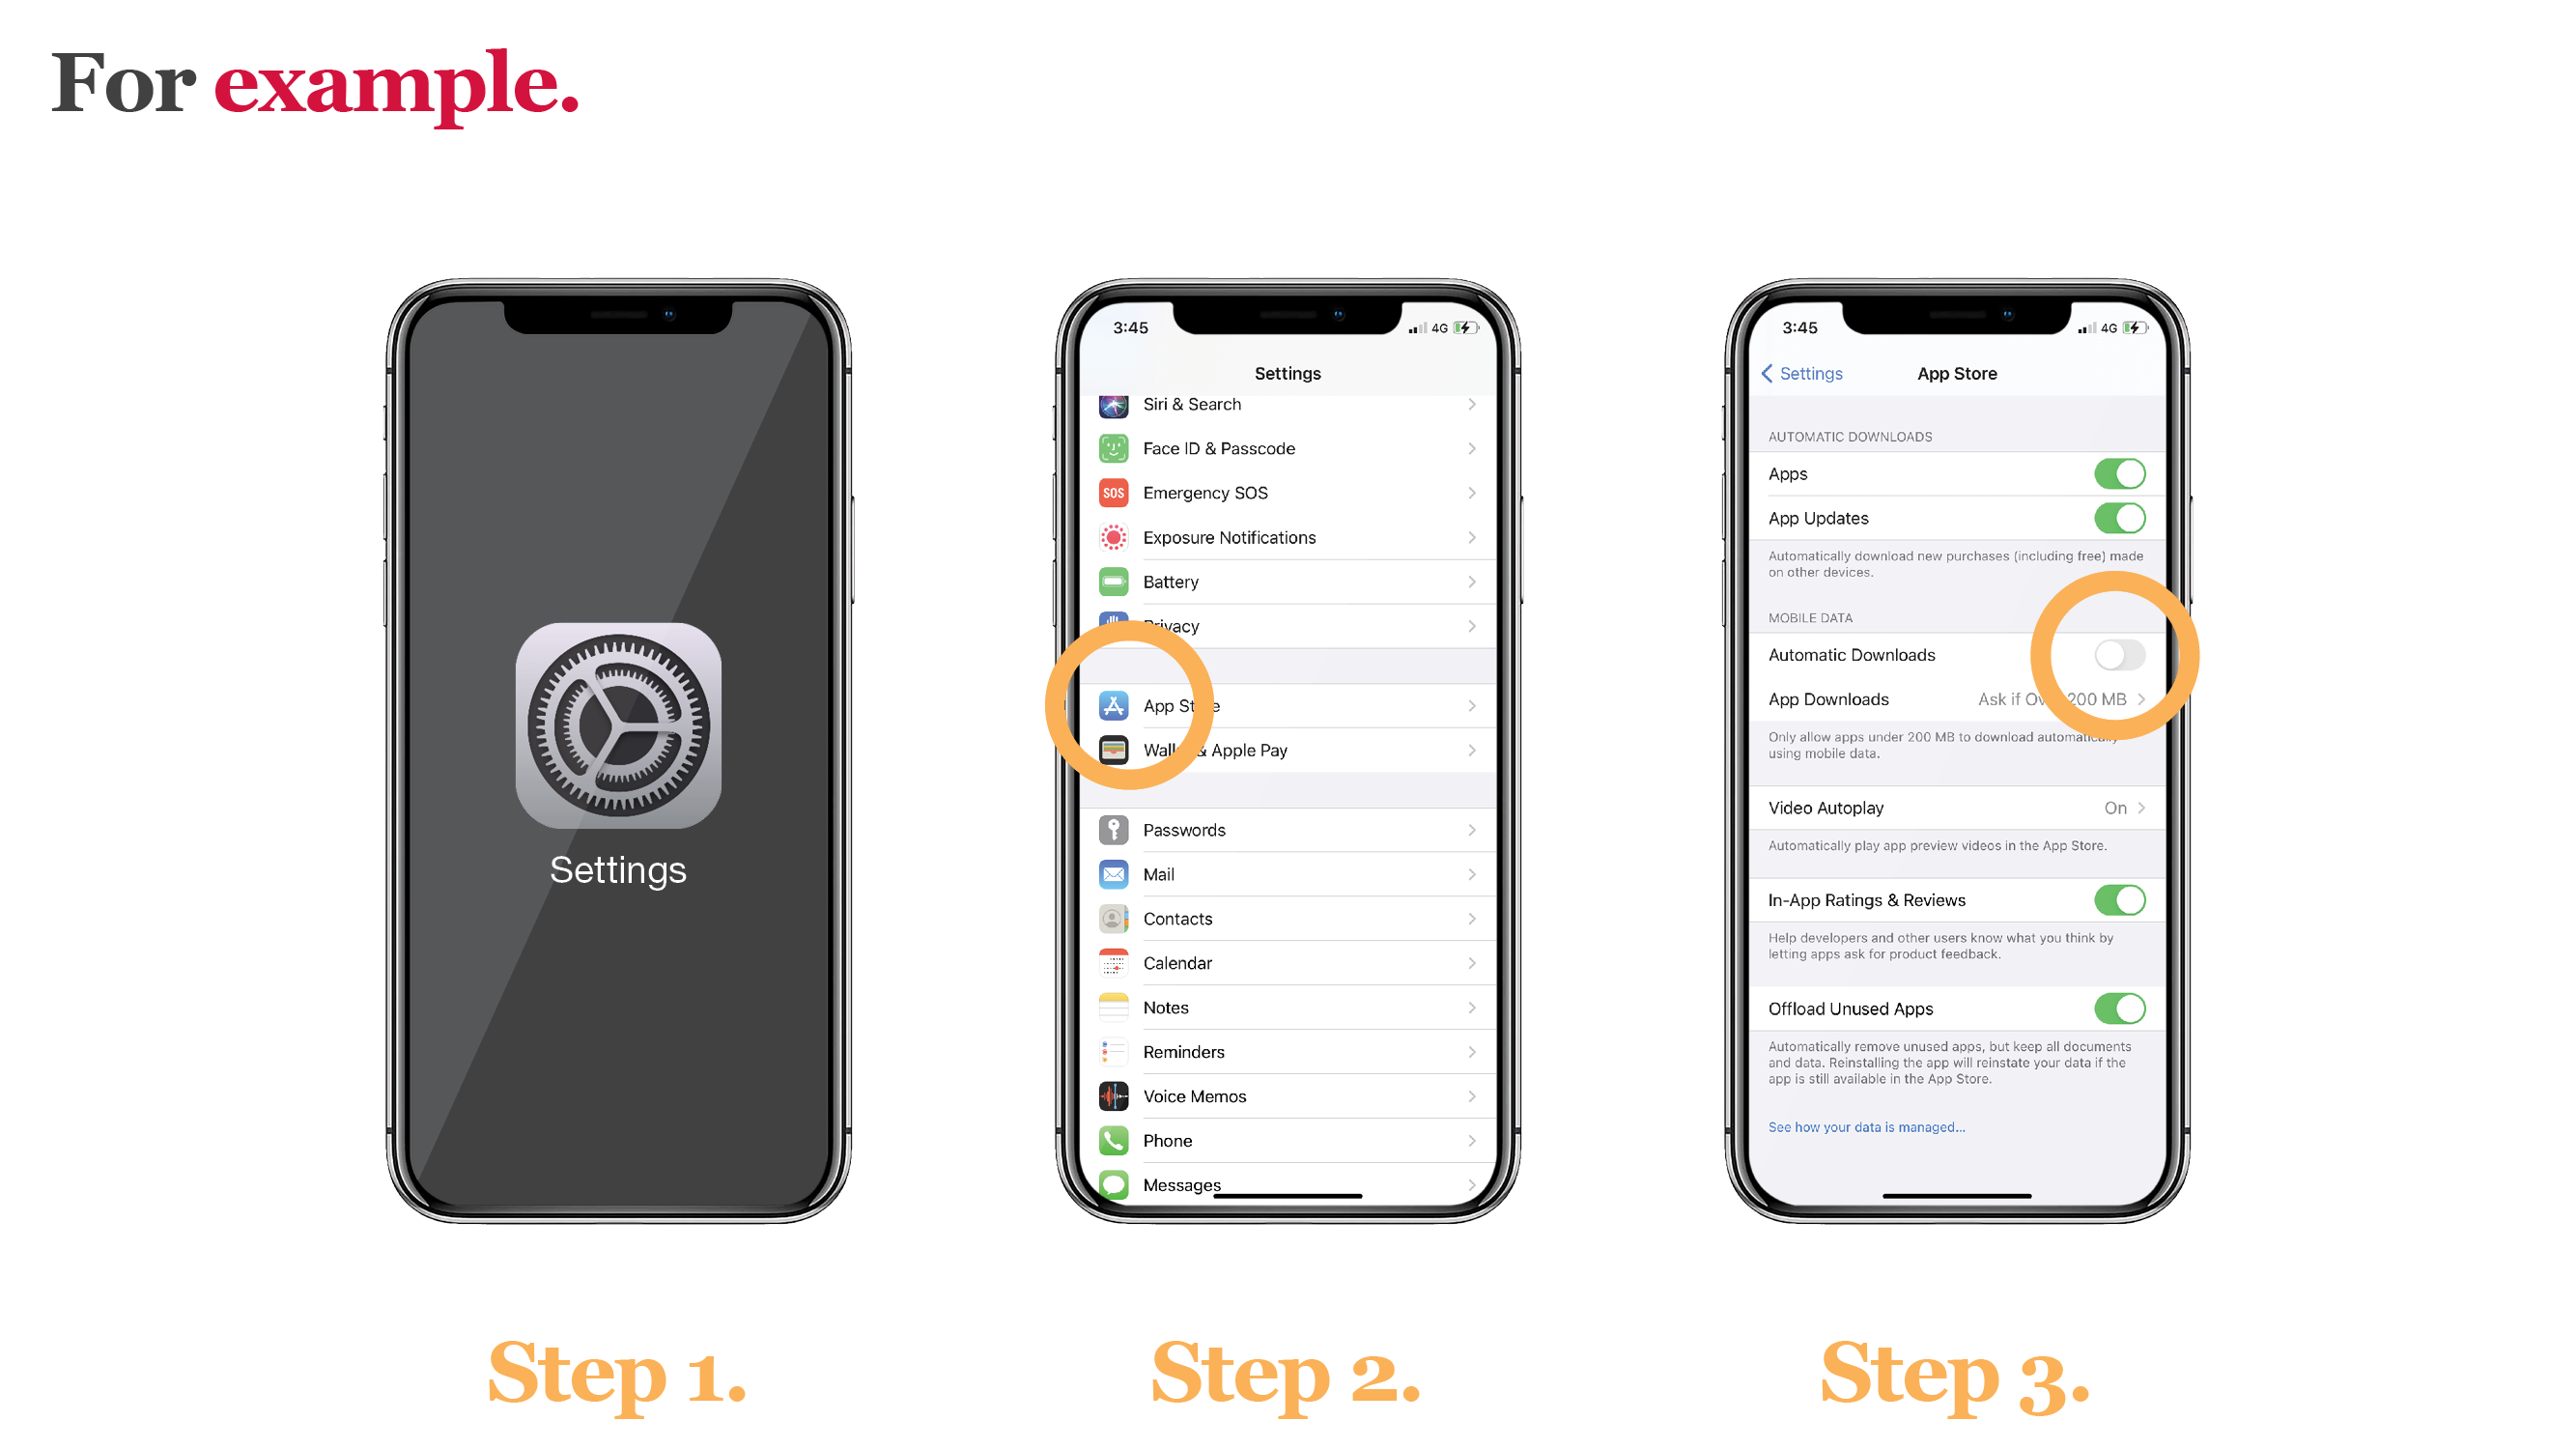 For example: Step 1. Open the Settings app. Step 2. Tap iTunes & App Store or App Store. Step 3. In the Automatic Downloads section, turn on App Updates by swiping the button to the right.